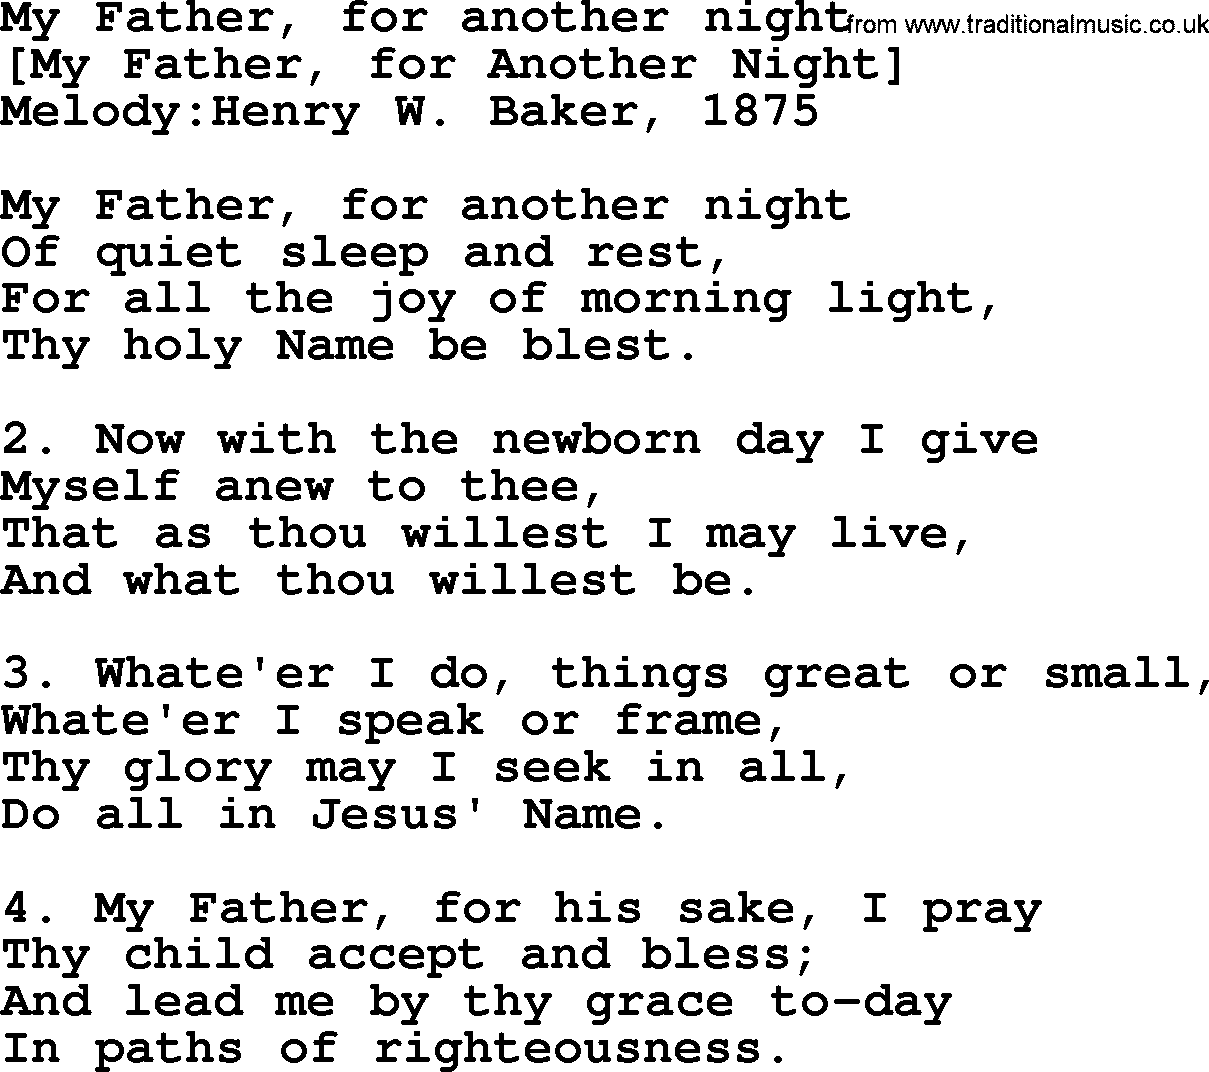 Old English Song: My Father, For Another Night lyrics